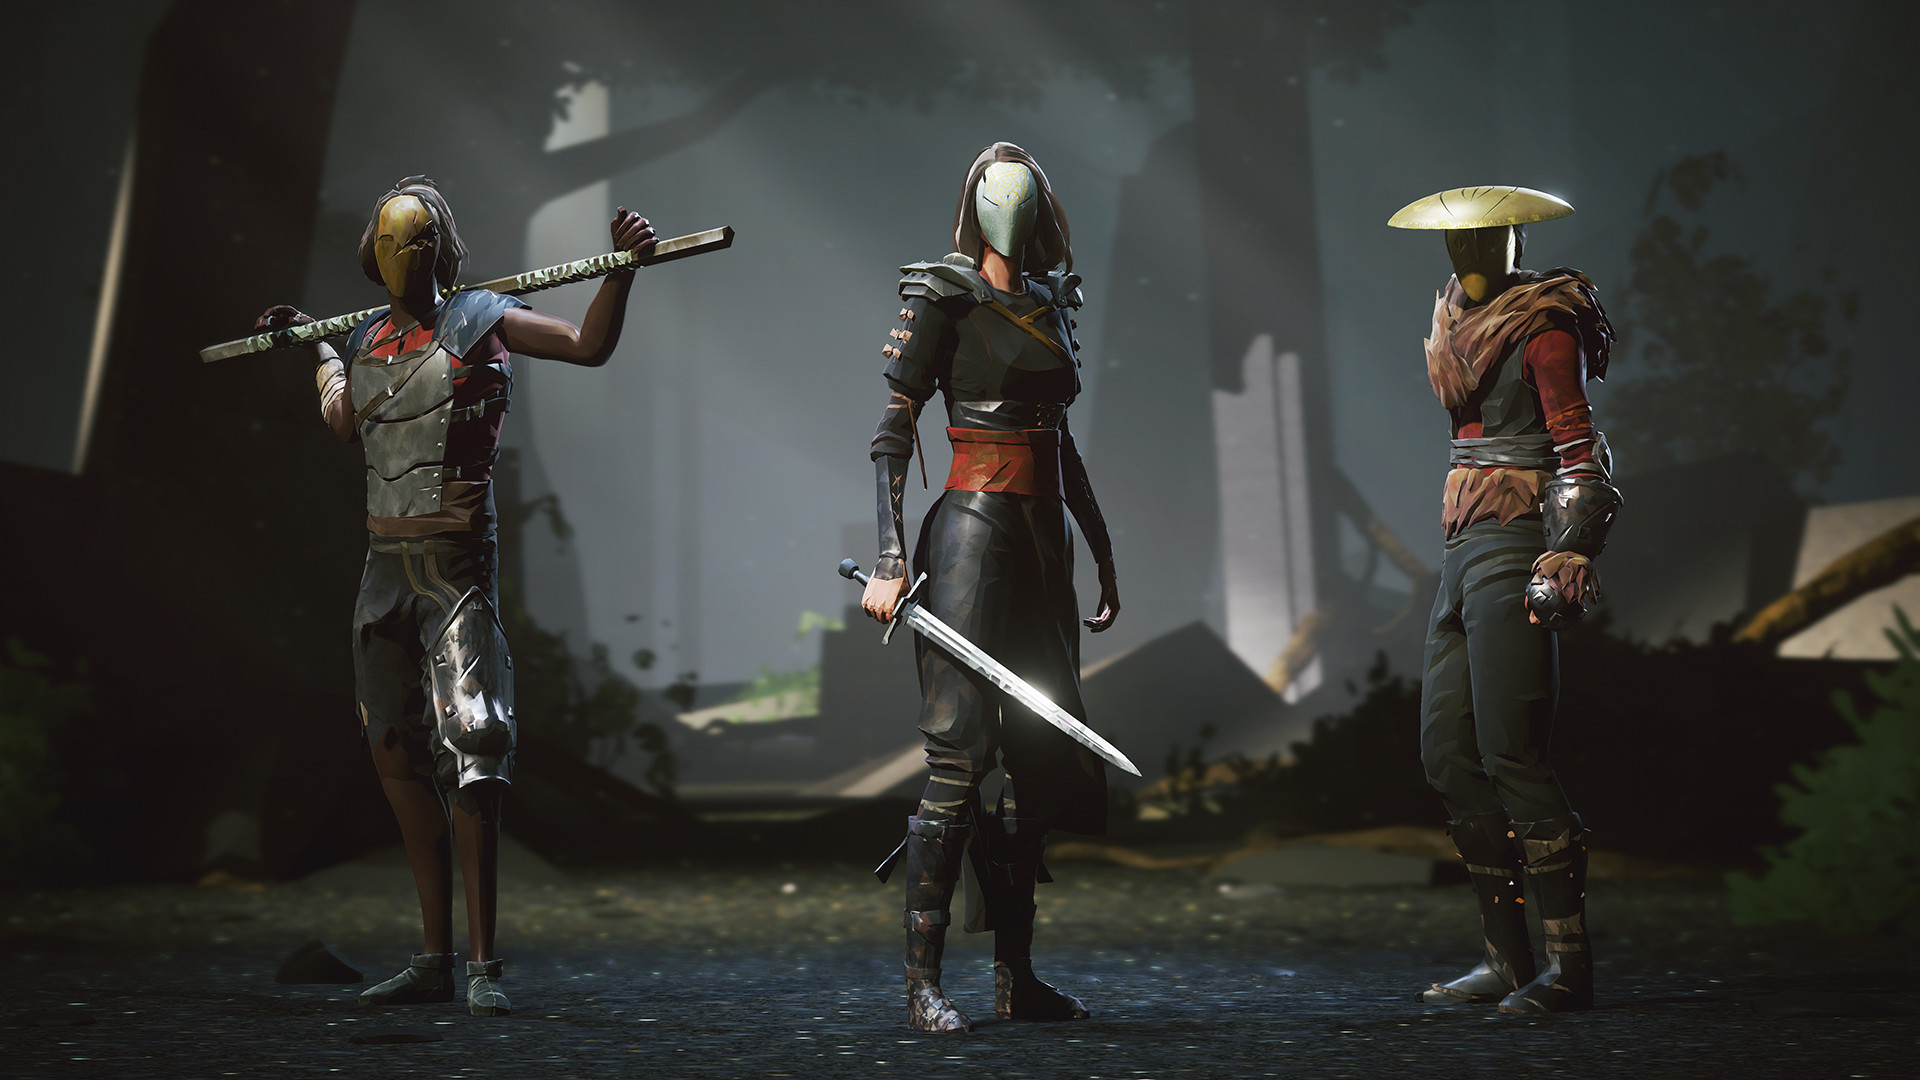 General 1920x1080 video games Absolver video game art sword